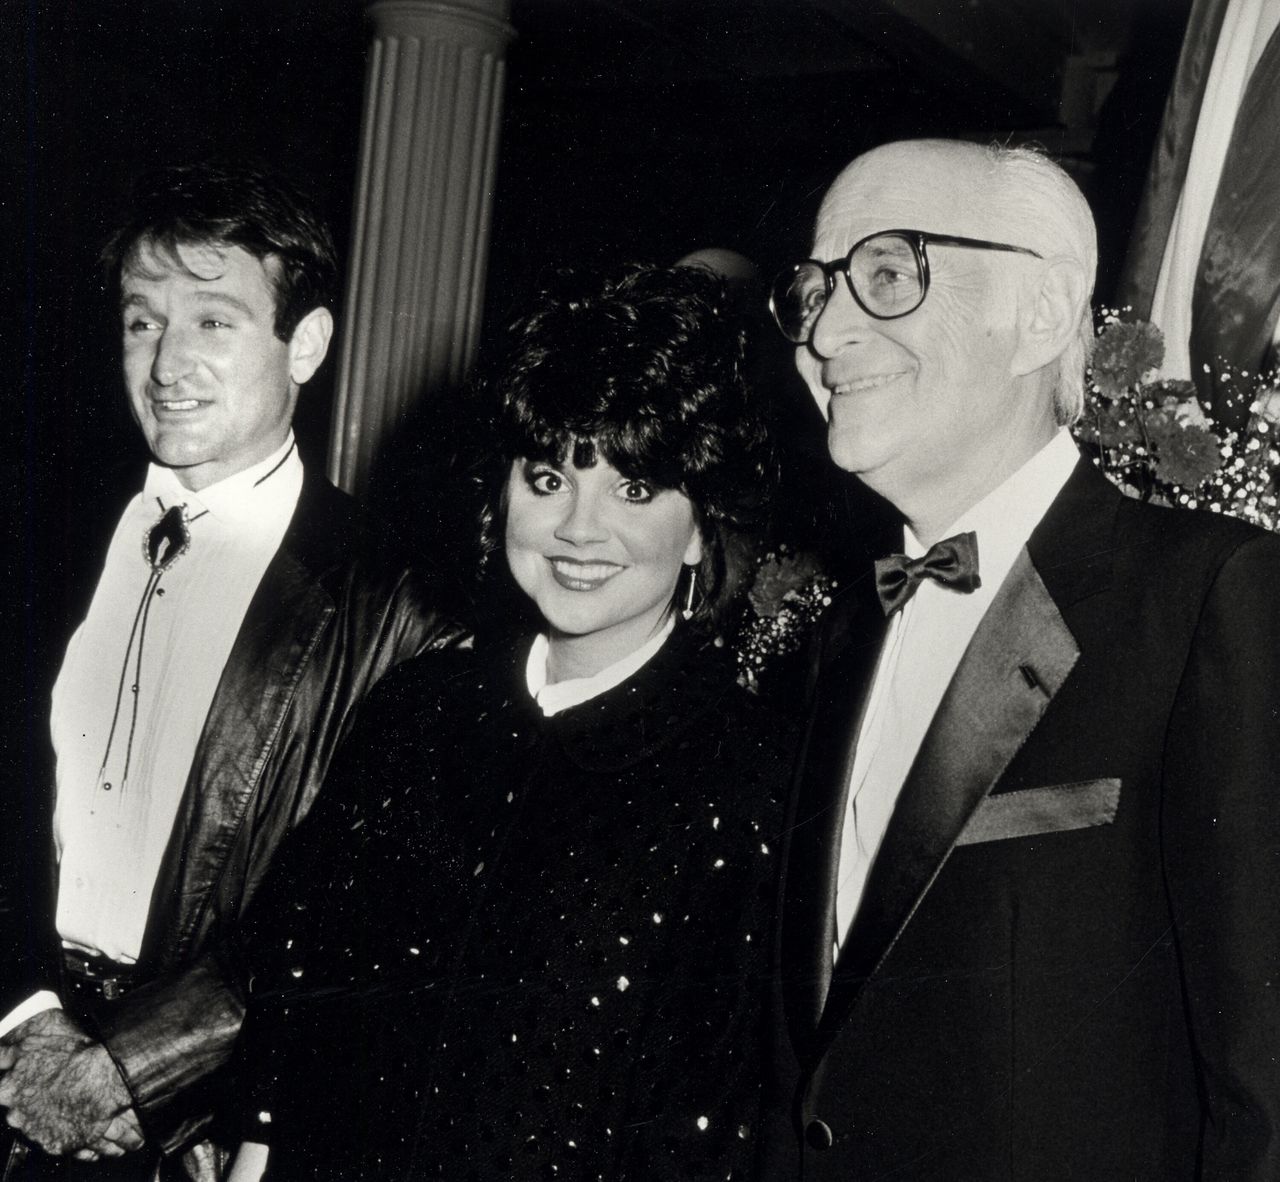 Lear (right) with singer Linda Ronstadt and actor Robin Williams at the Dinner Dance for People of the American Way on Oct. 24, 1985, at the Puck Building in New York City.